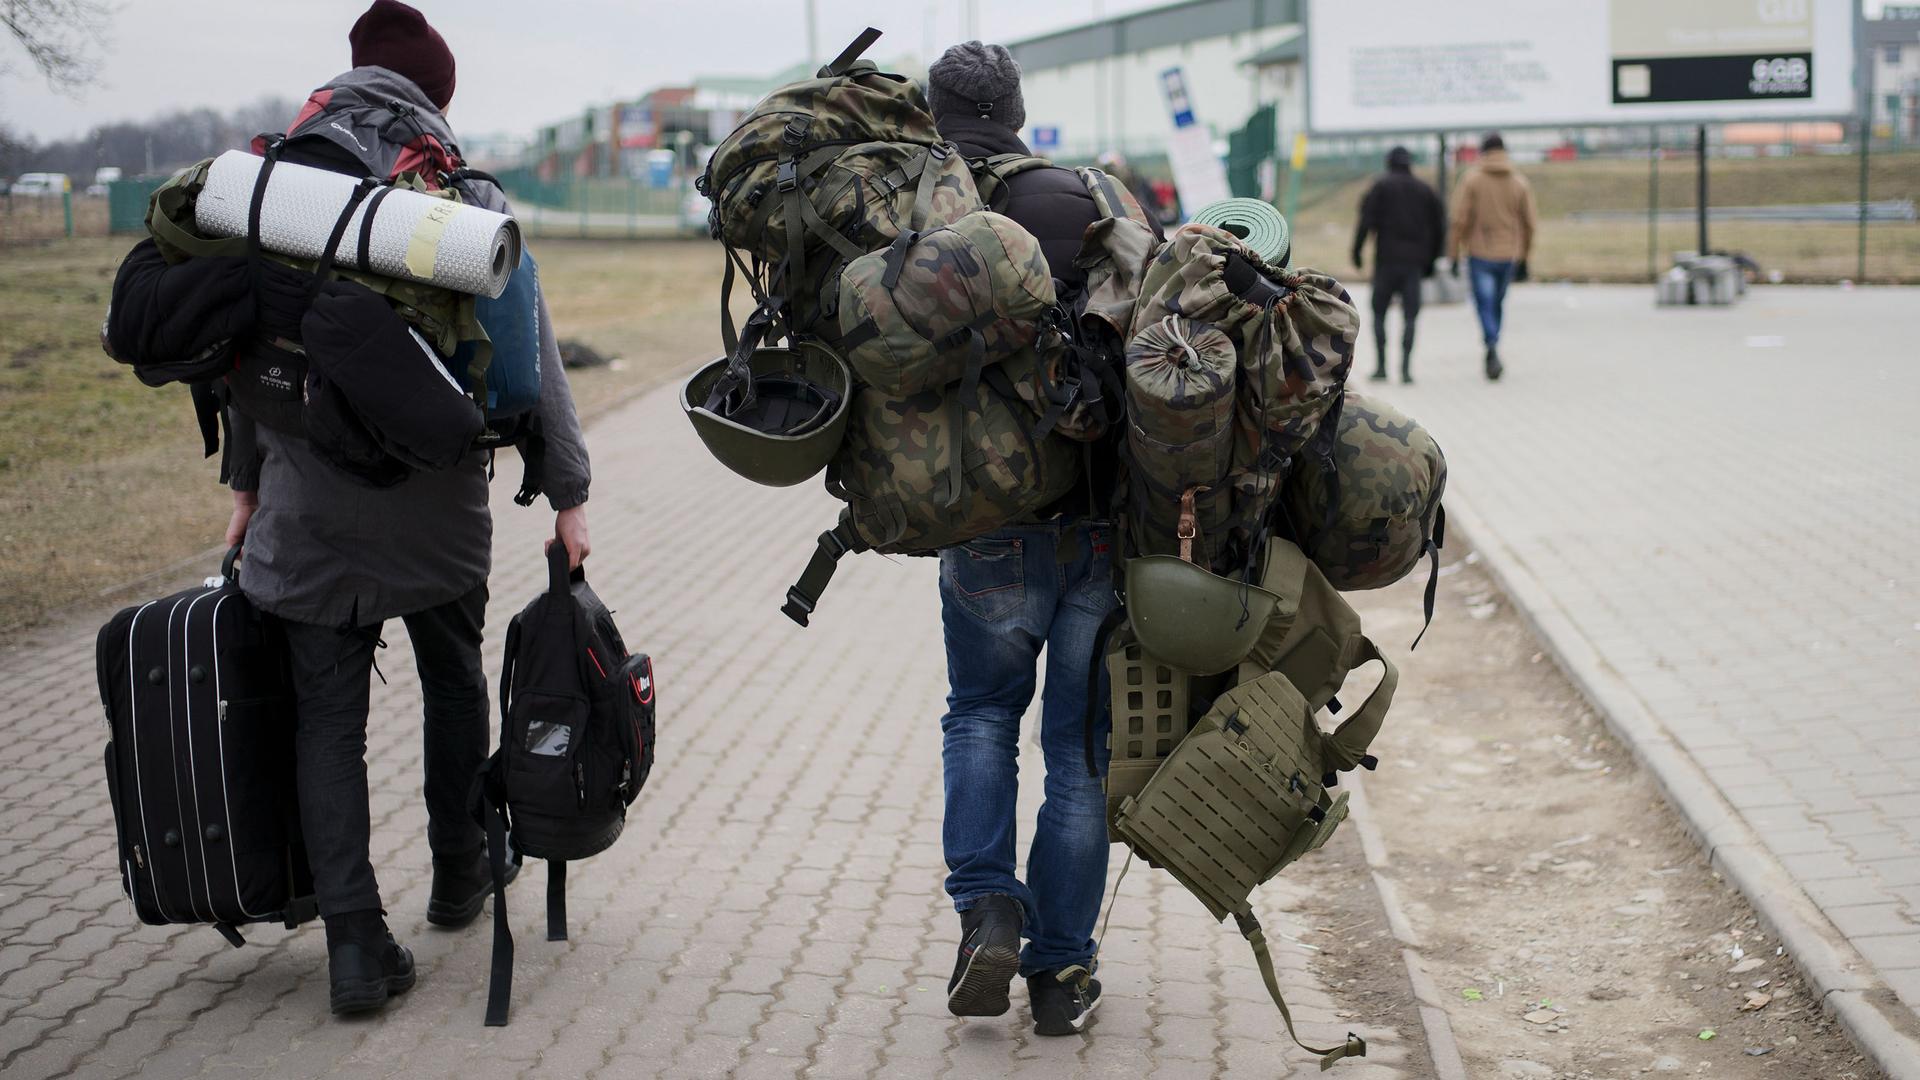 A man carries combat gear as he leaves Poland to fight in Ukraine, at the border crossing in Medyka, Poland, Wednesday, March 2, 2022. 